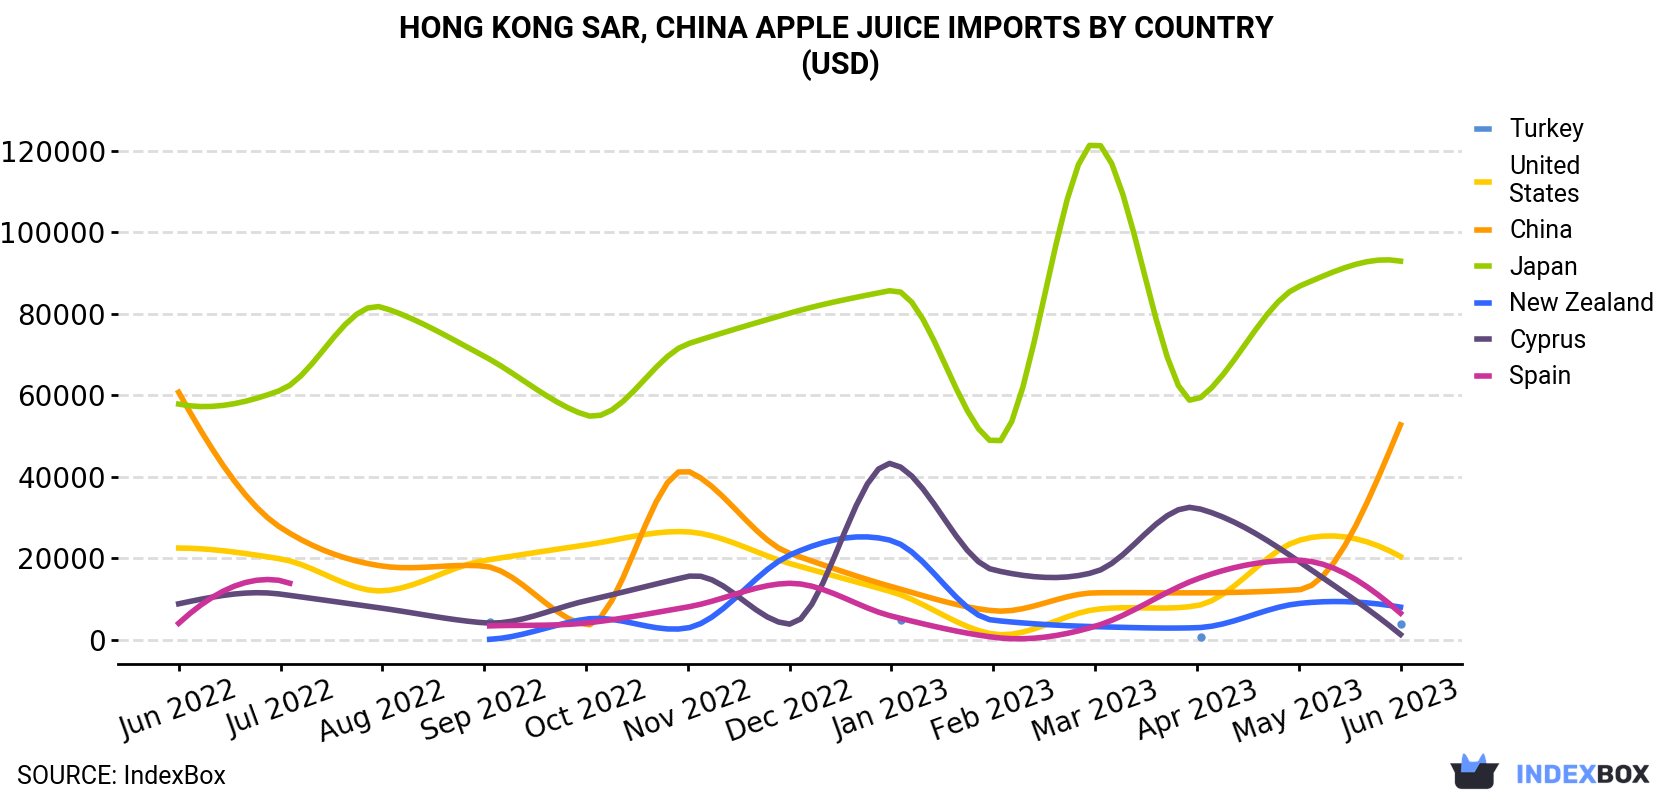 Hong Kong Apple Juice Imports By Country (USD)